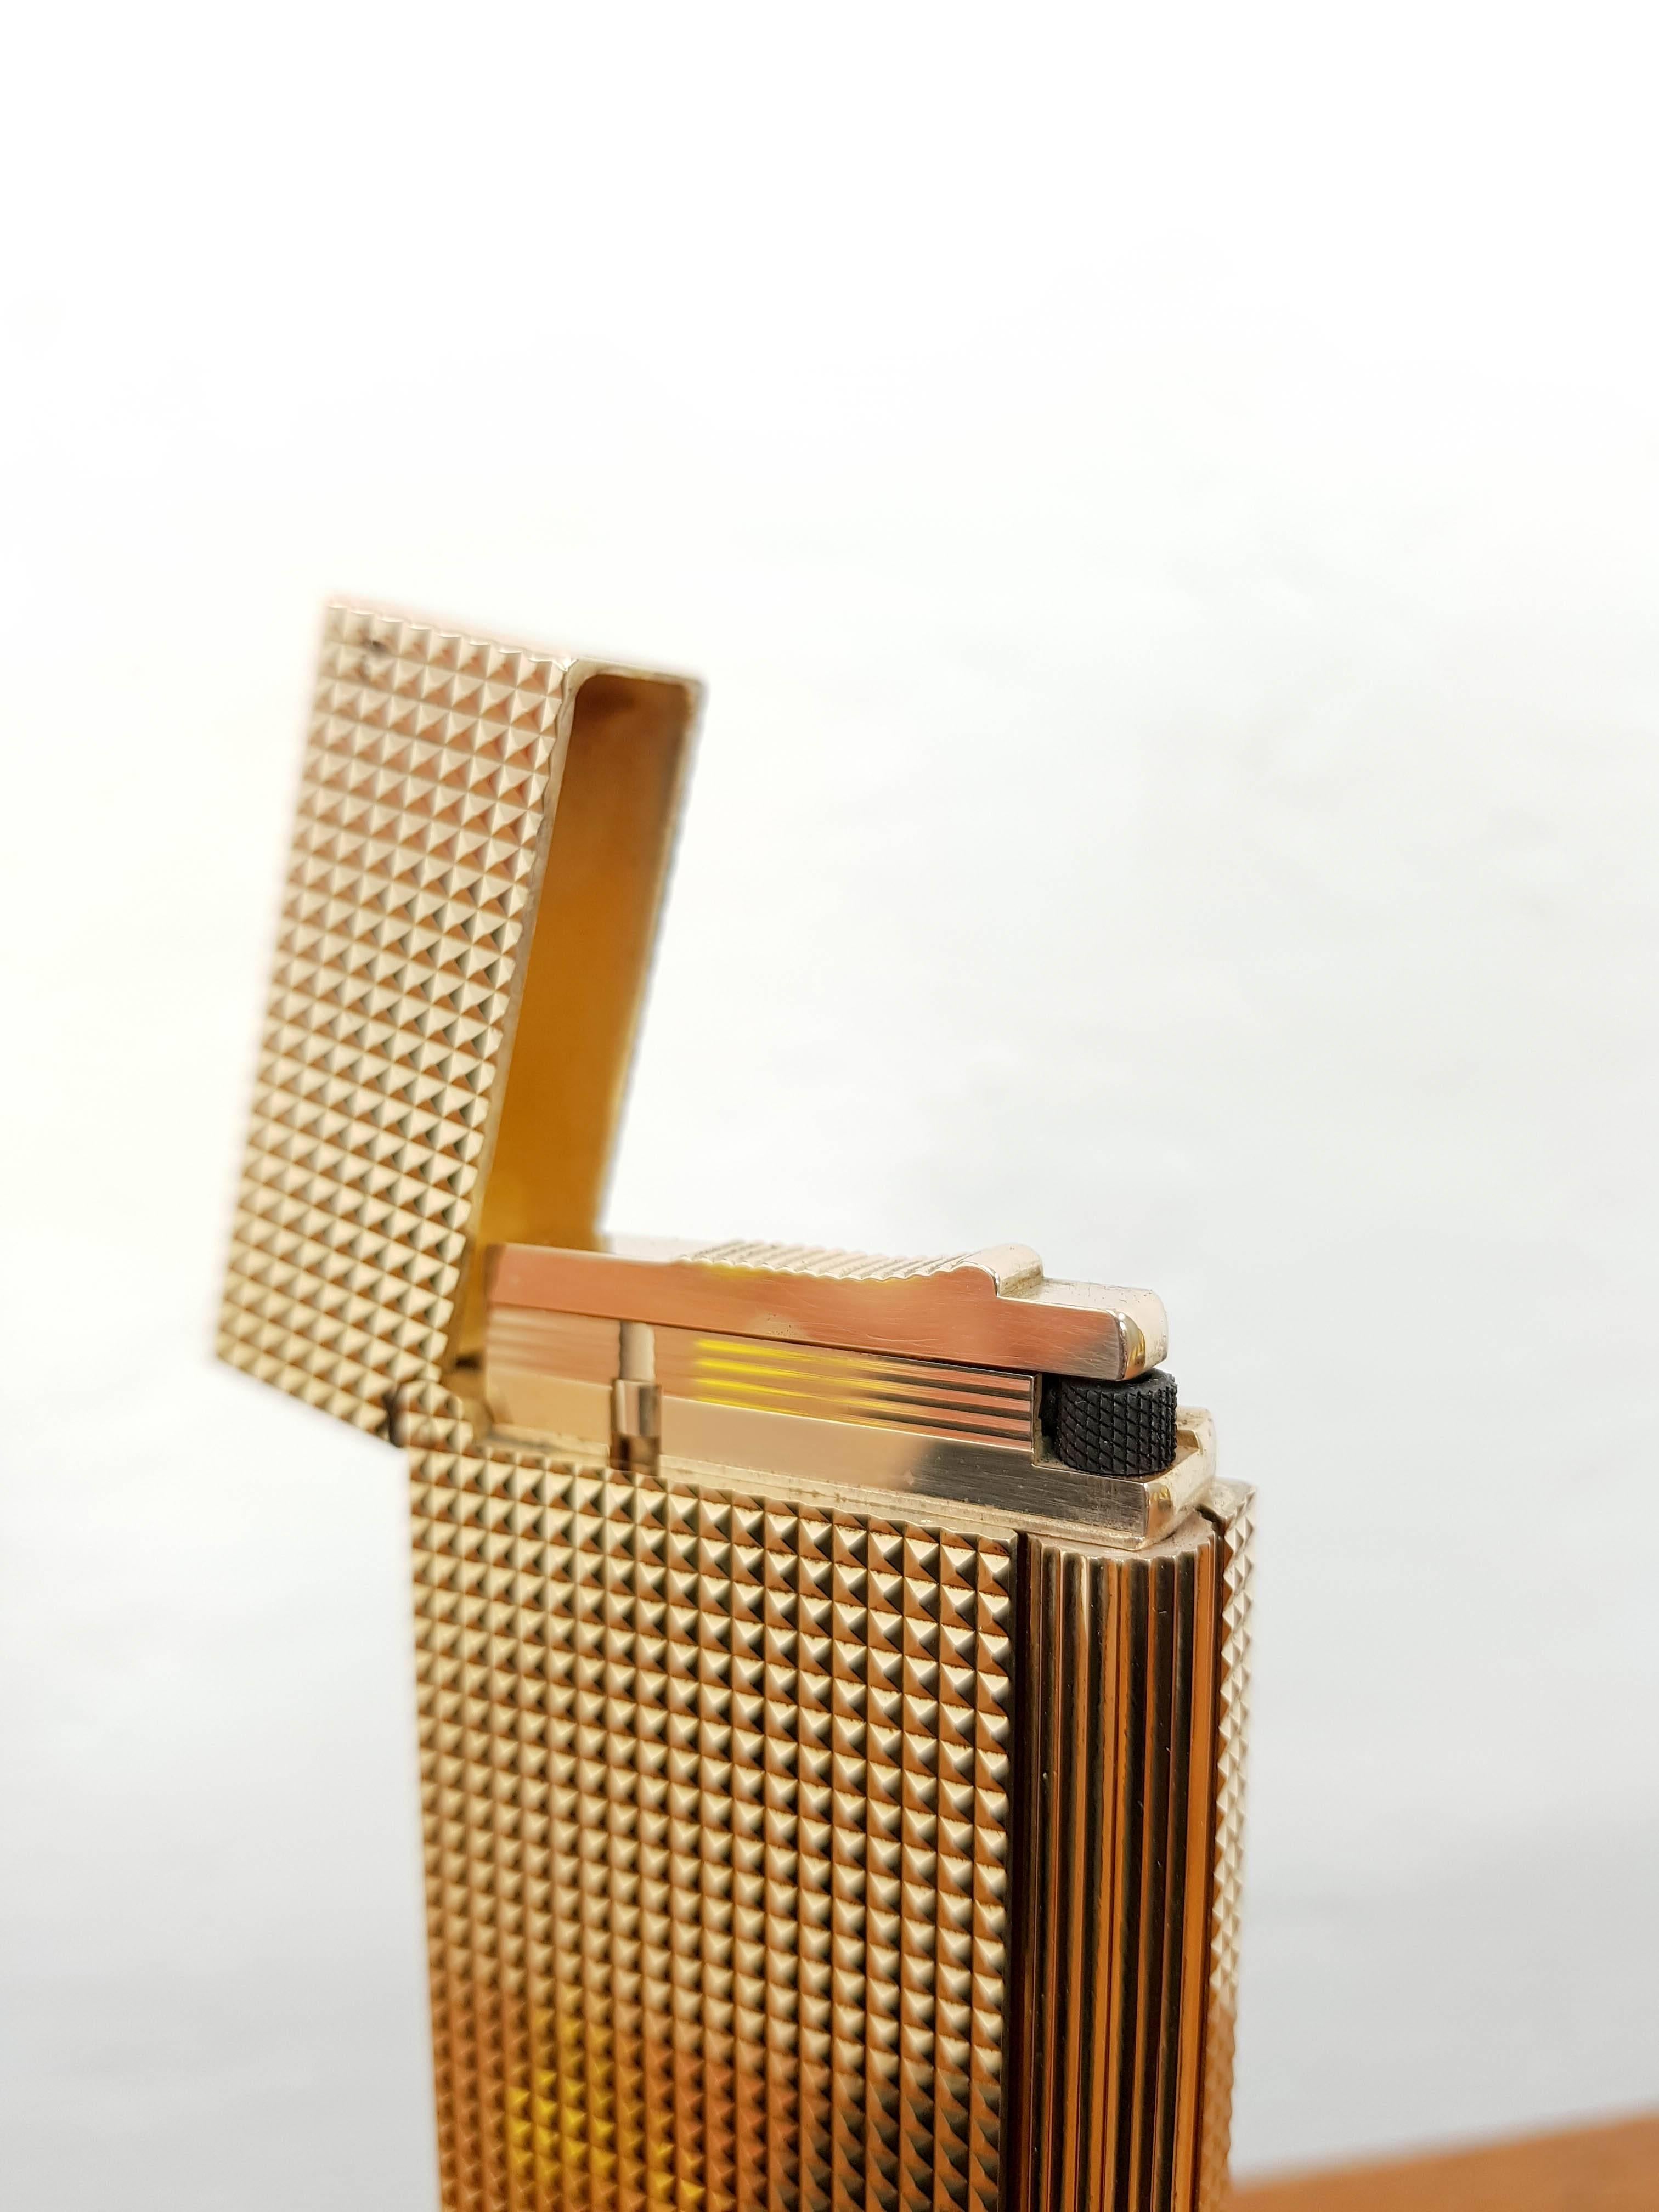 Rare table lighter version of the S.T. Dupont Ligne 2 lighter famously referred to as the greatest lighter in the world. In gold with diamond head finish. Recently serviced in Paris and includes an 18 month factory warranty. in its original leather